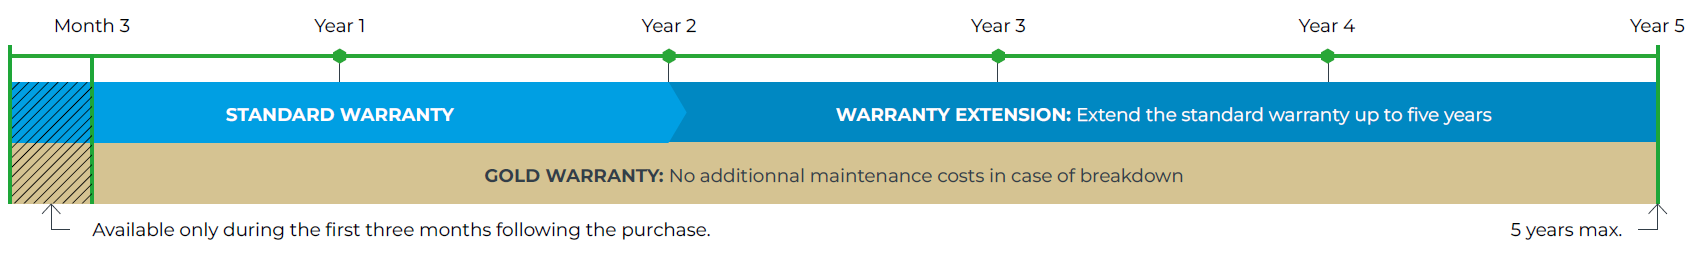 Warranty contracts services - Timeline